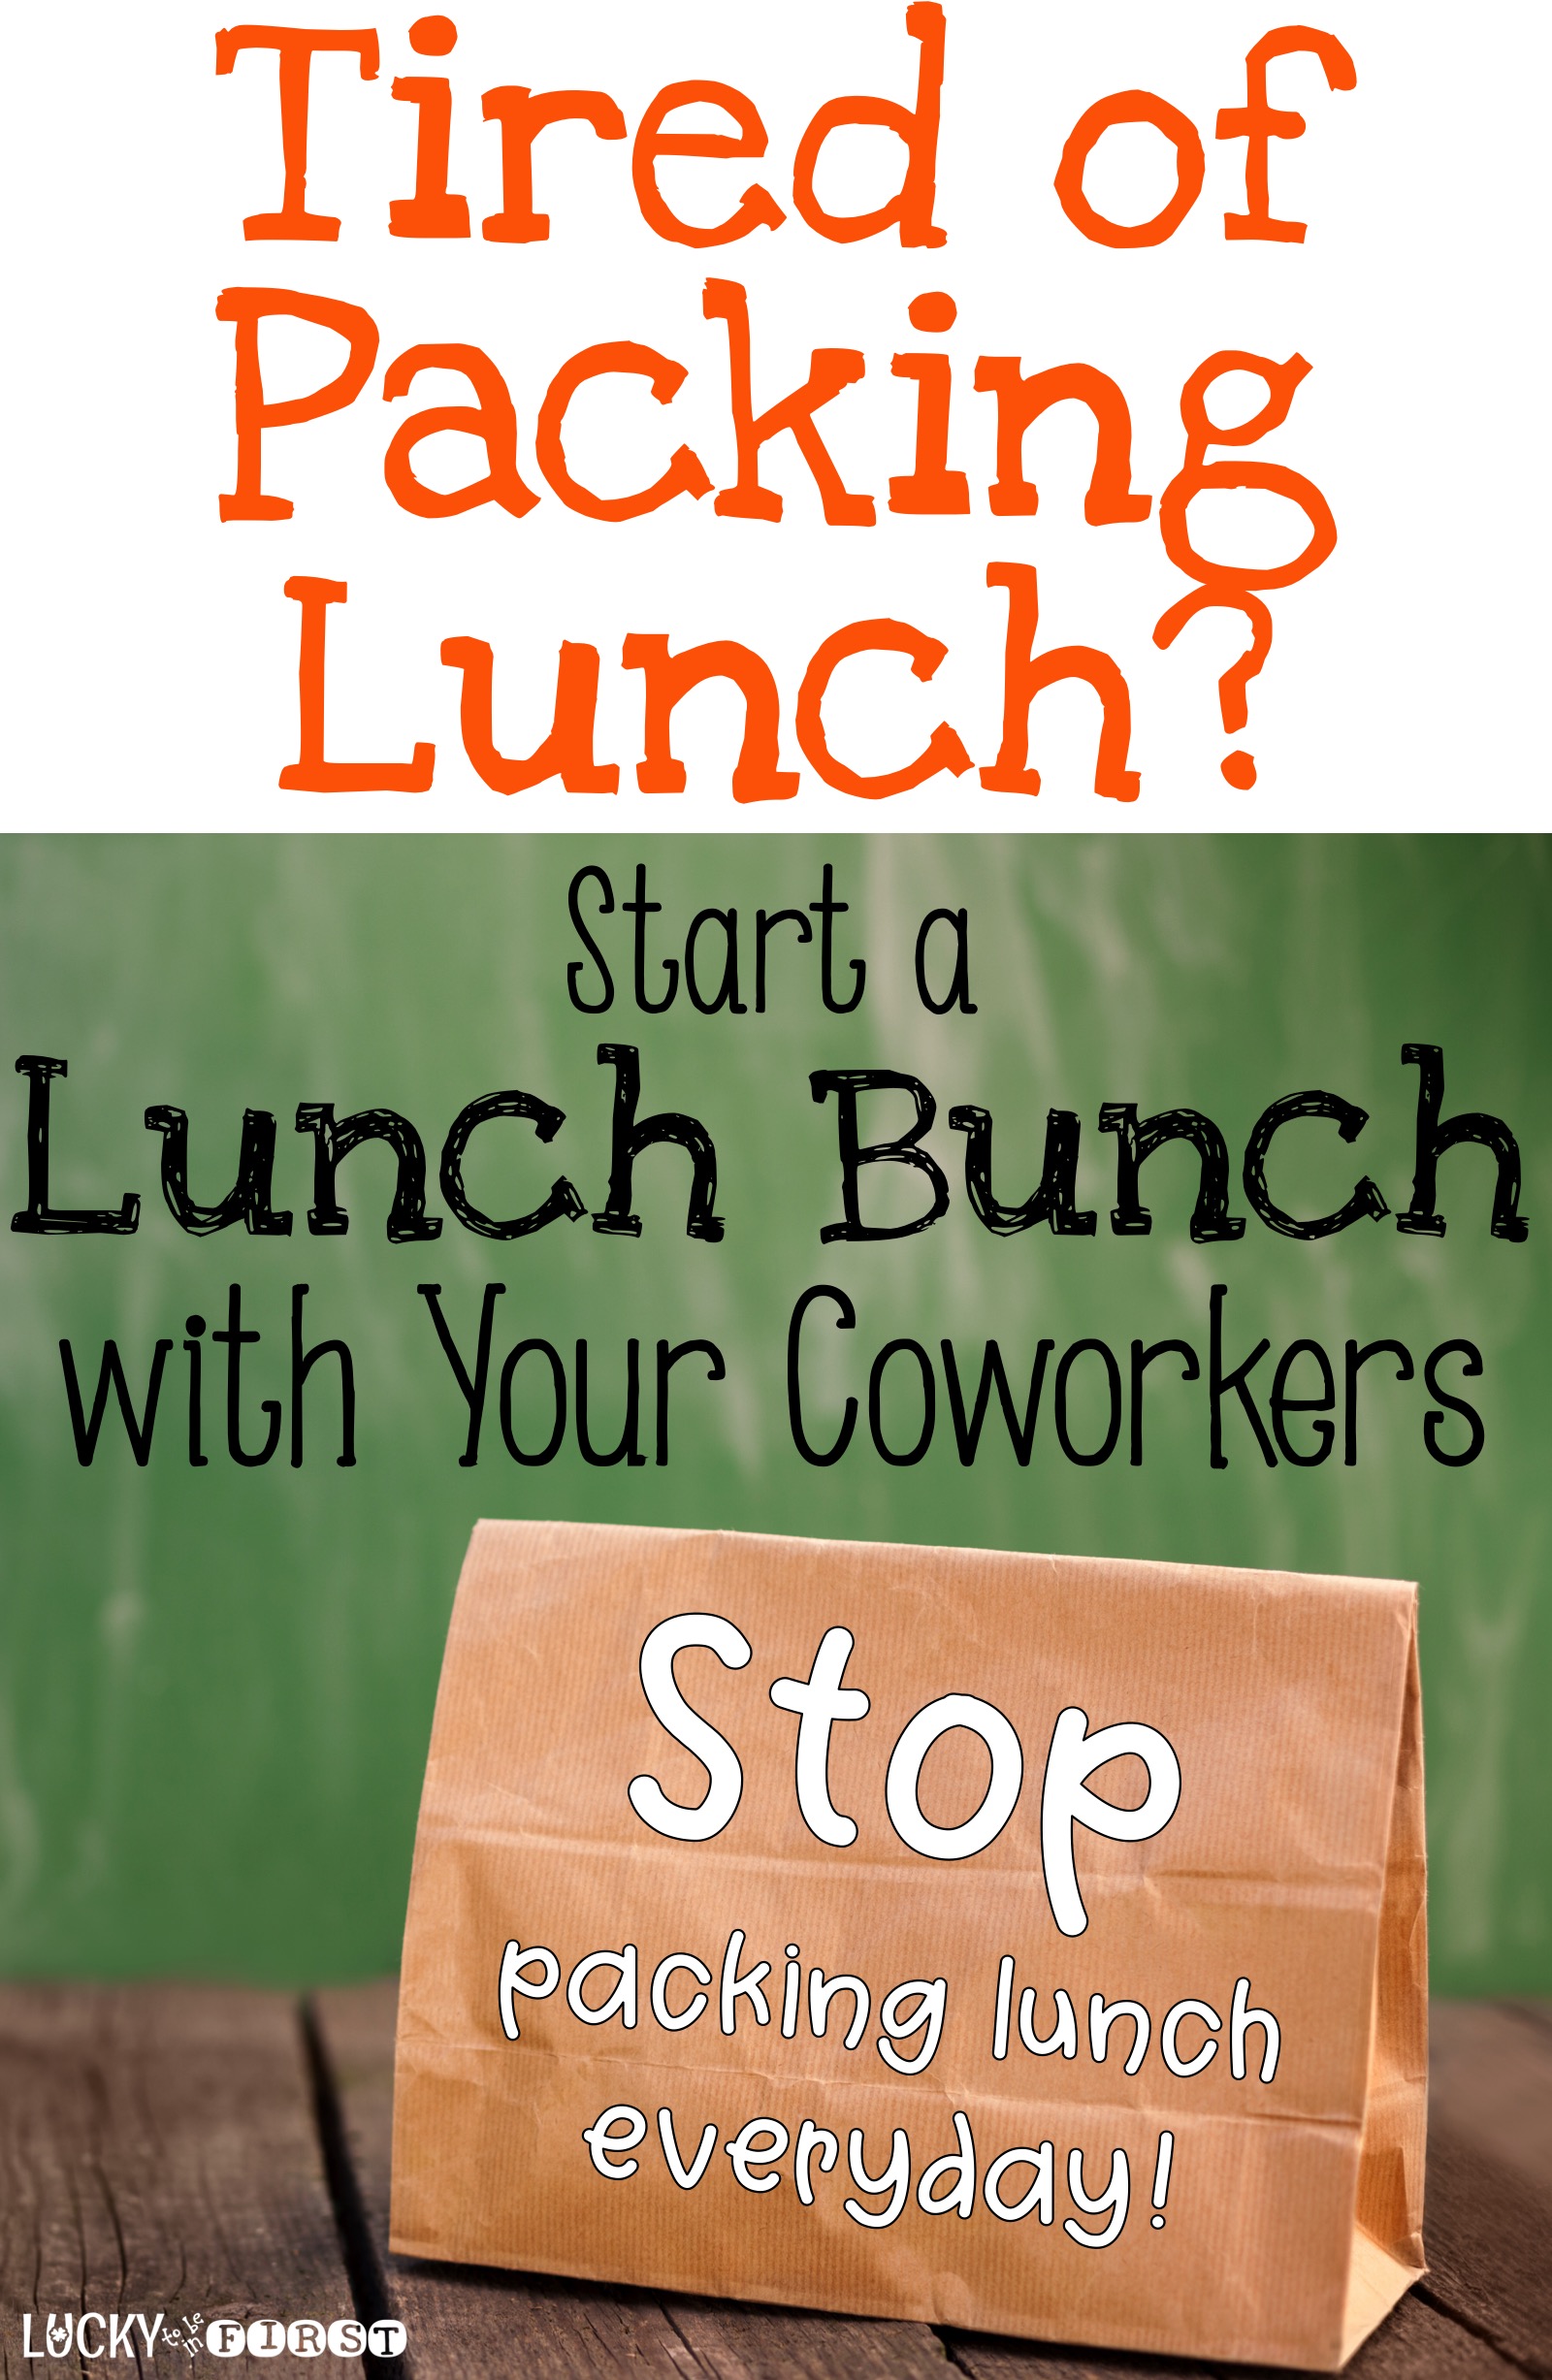 Tired of Packing Lunch for work? Start a Lunch Bunch with your coworkers! Find out how over on the blog! 